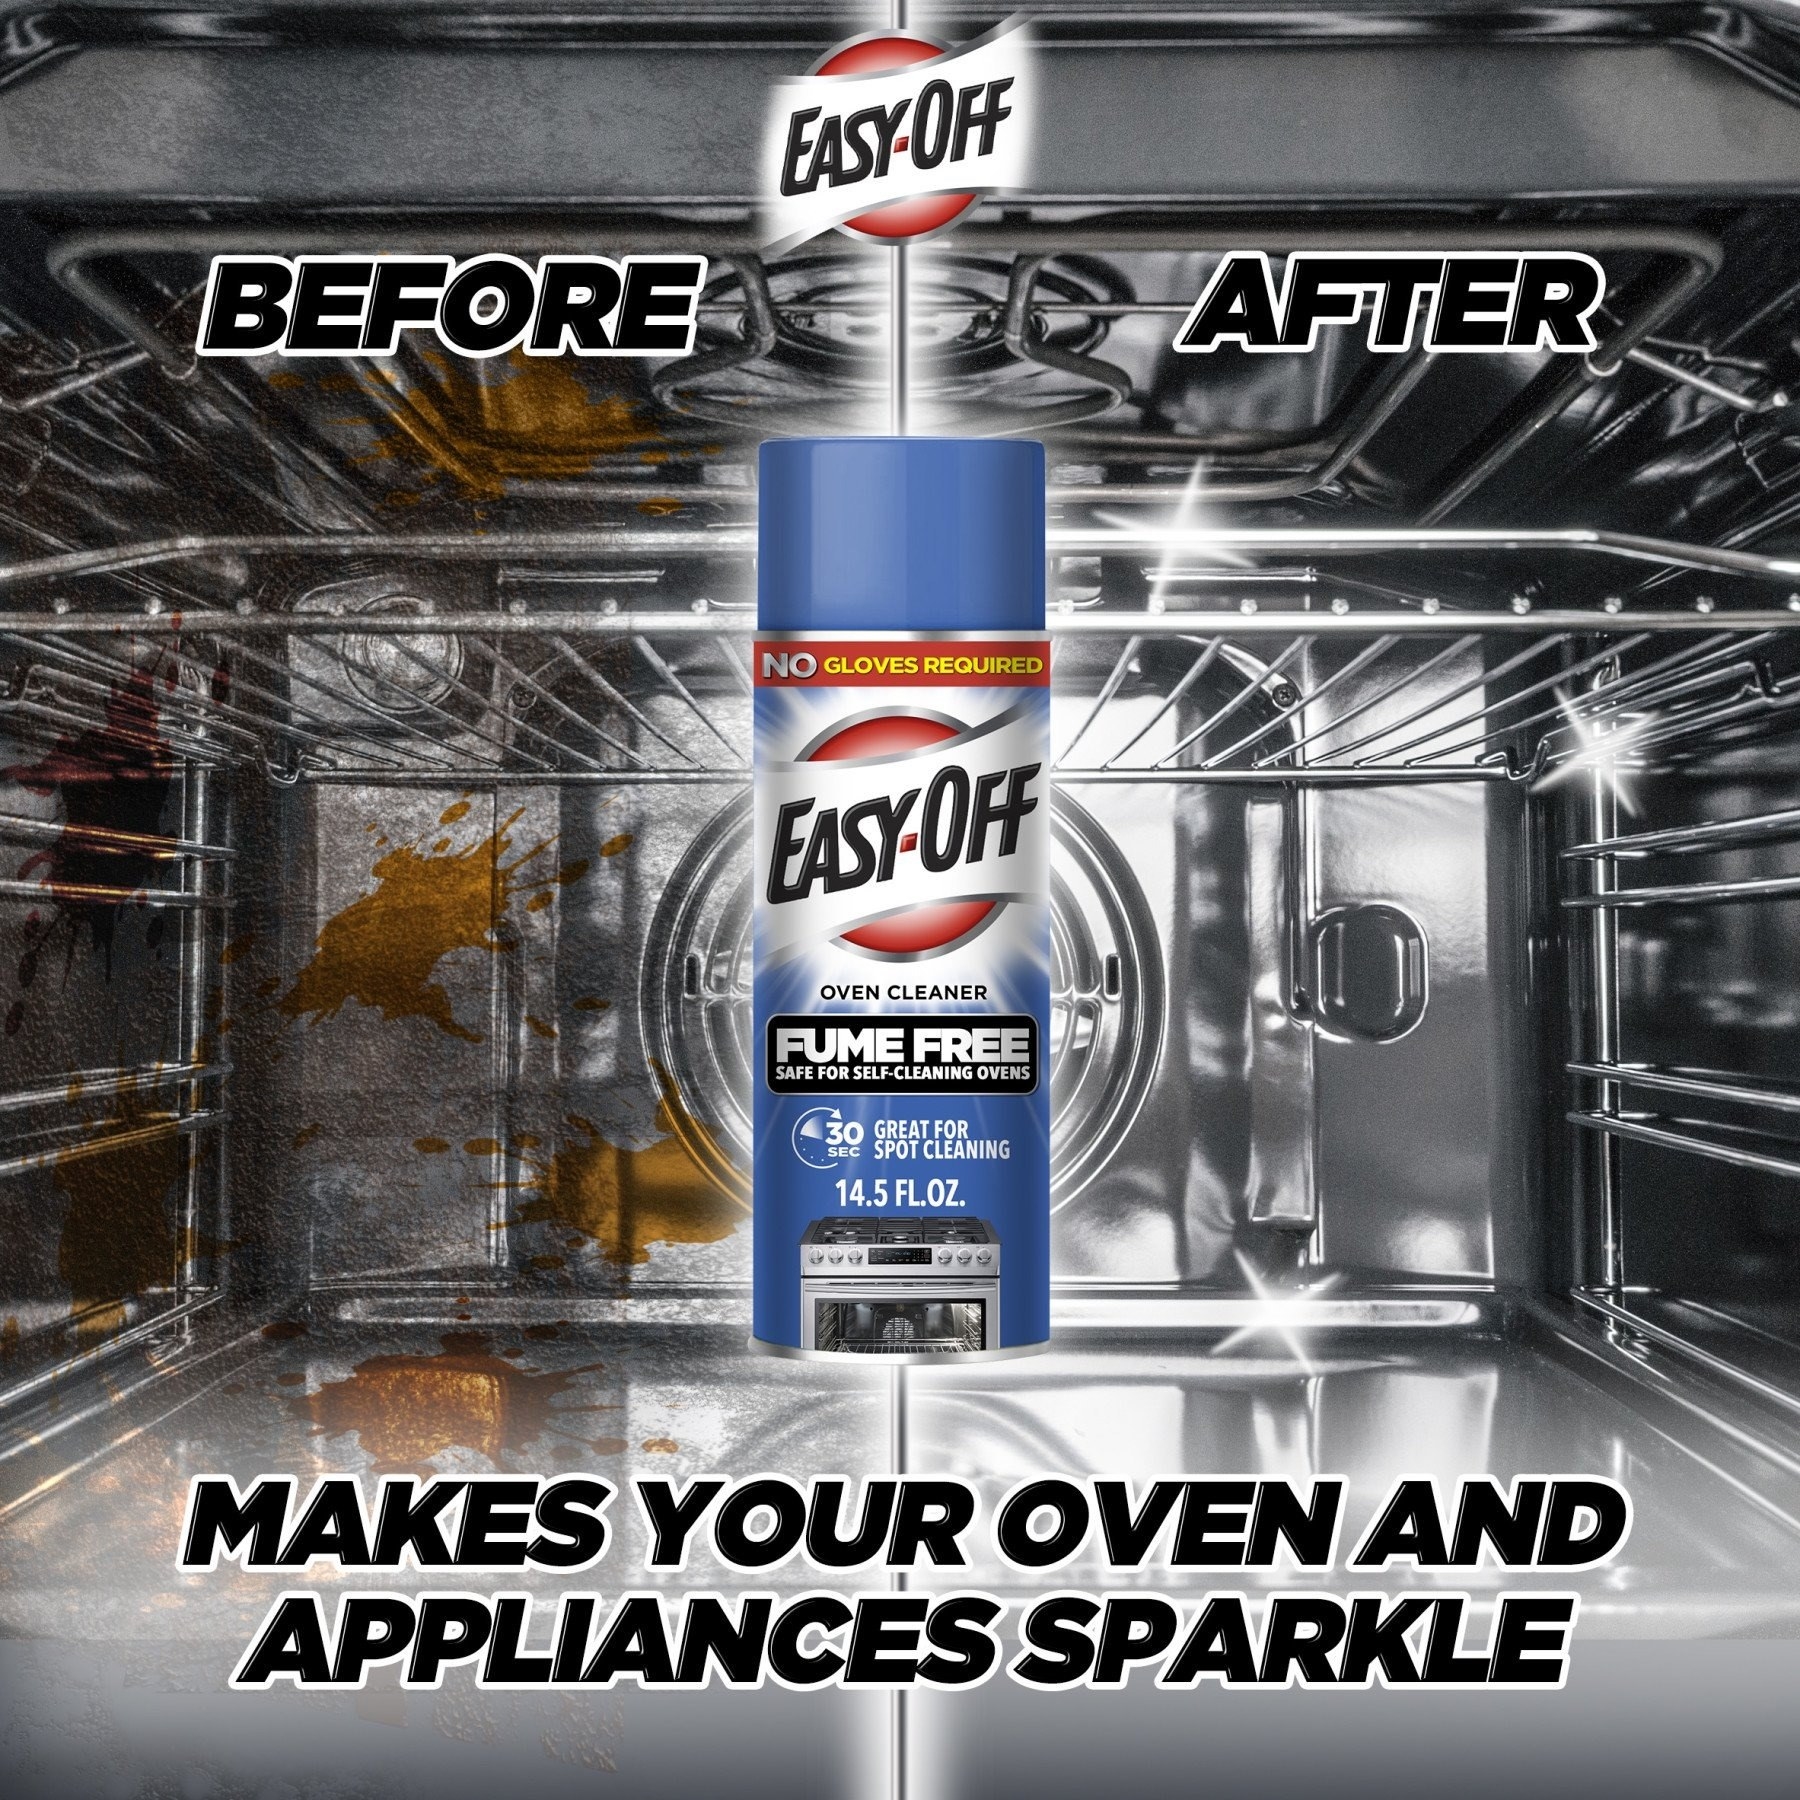 The fume-free oven cleaning spray with a before and after image of an oven and the header &quot;makes your oven and appliances sparkle&quot;